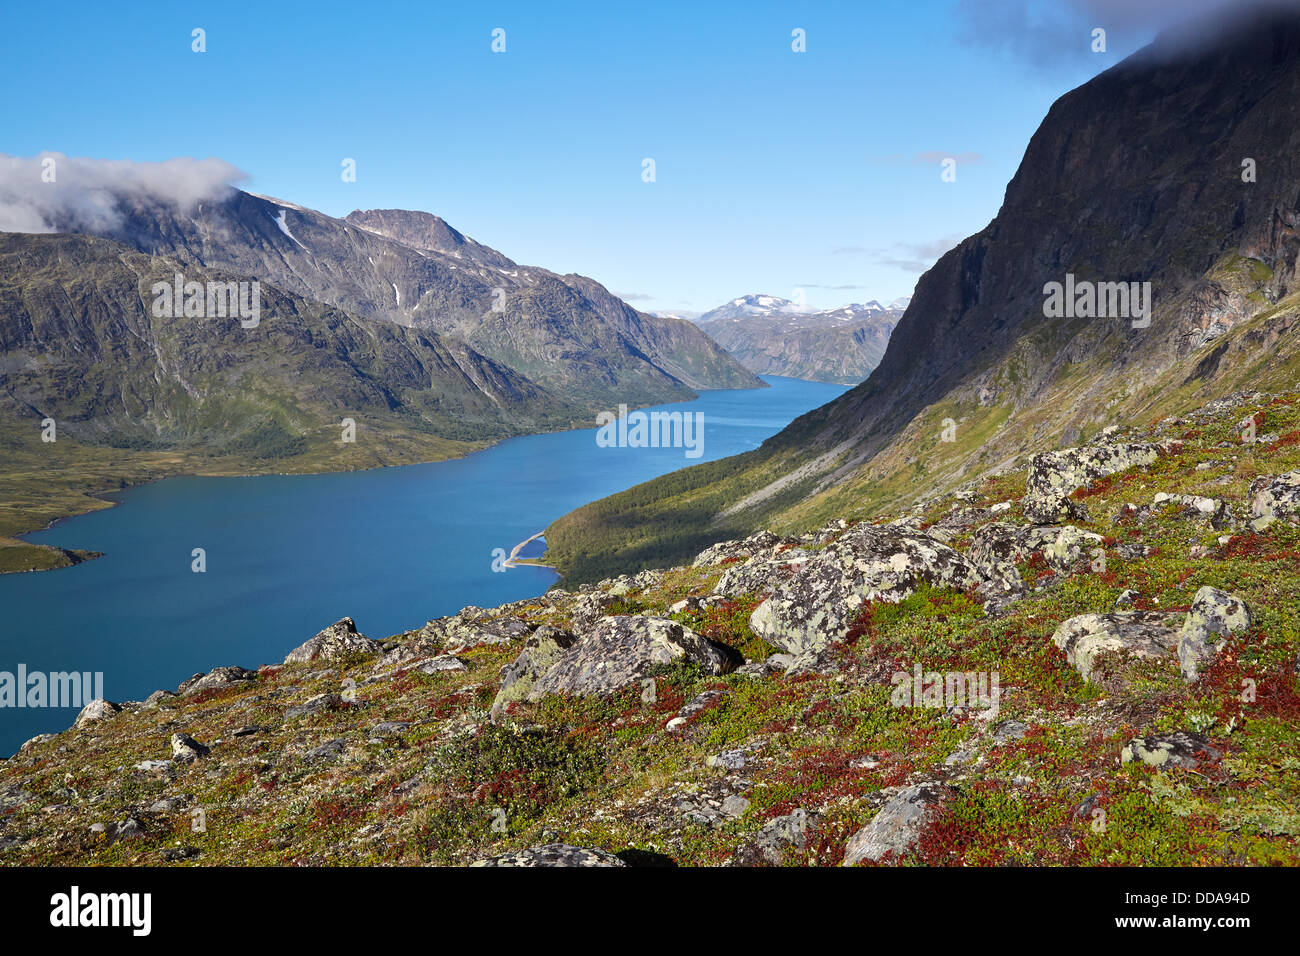 View of Lake Gjende from the ascent to the Besseggen Ridge walk Jotunheimen National Park Norway Stock Photo